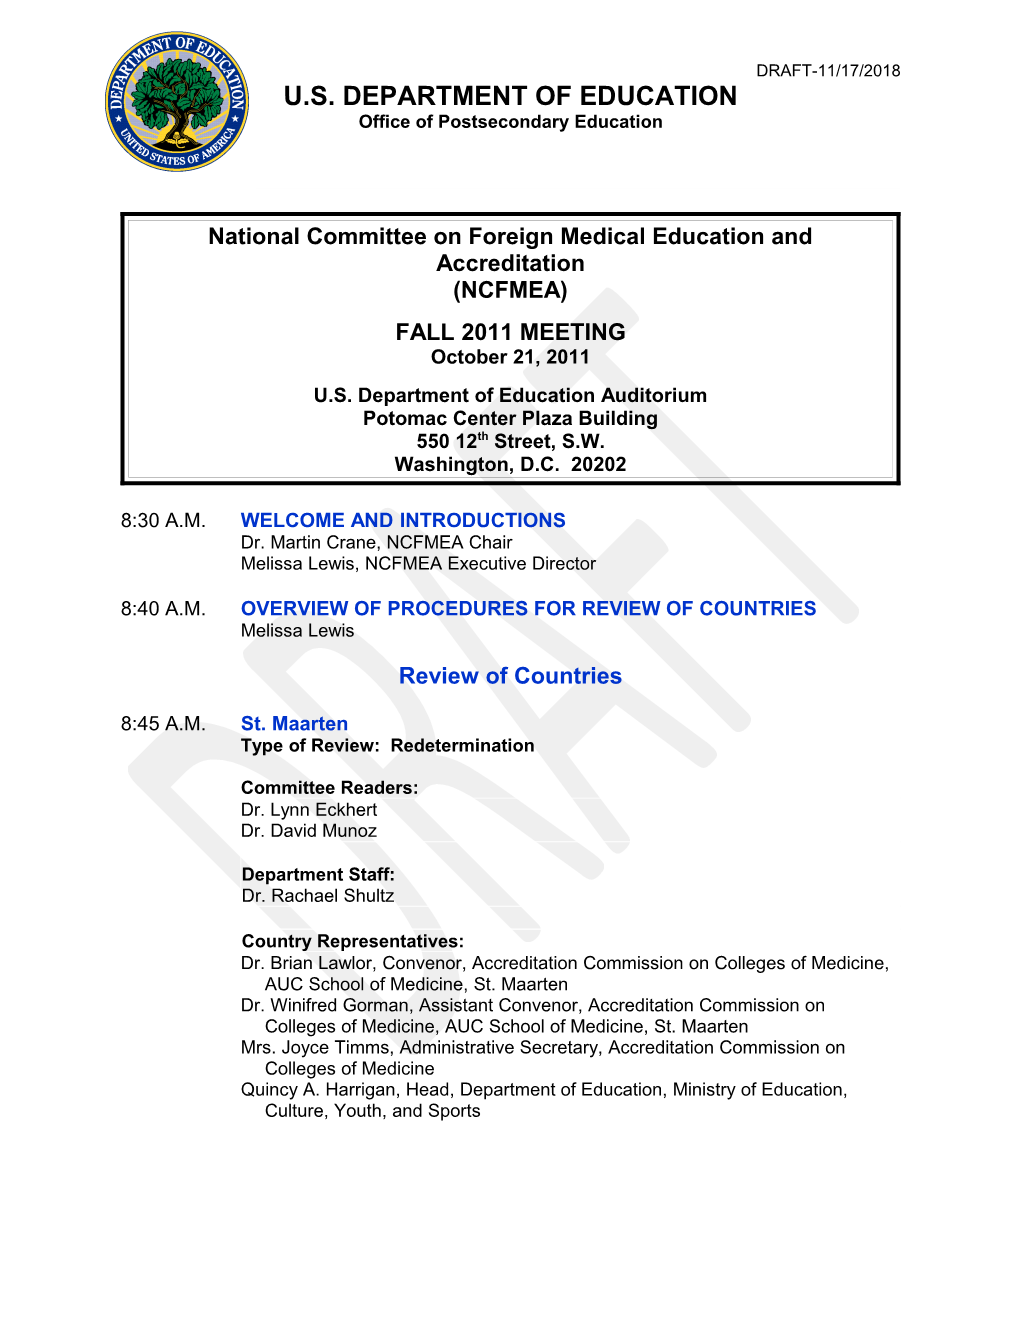 National Committee on Foreign Medical Education and Accreditation - Fall 2011 Agenda (MS Word)